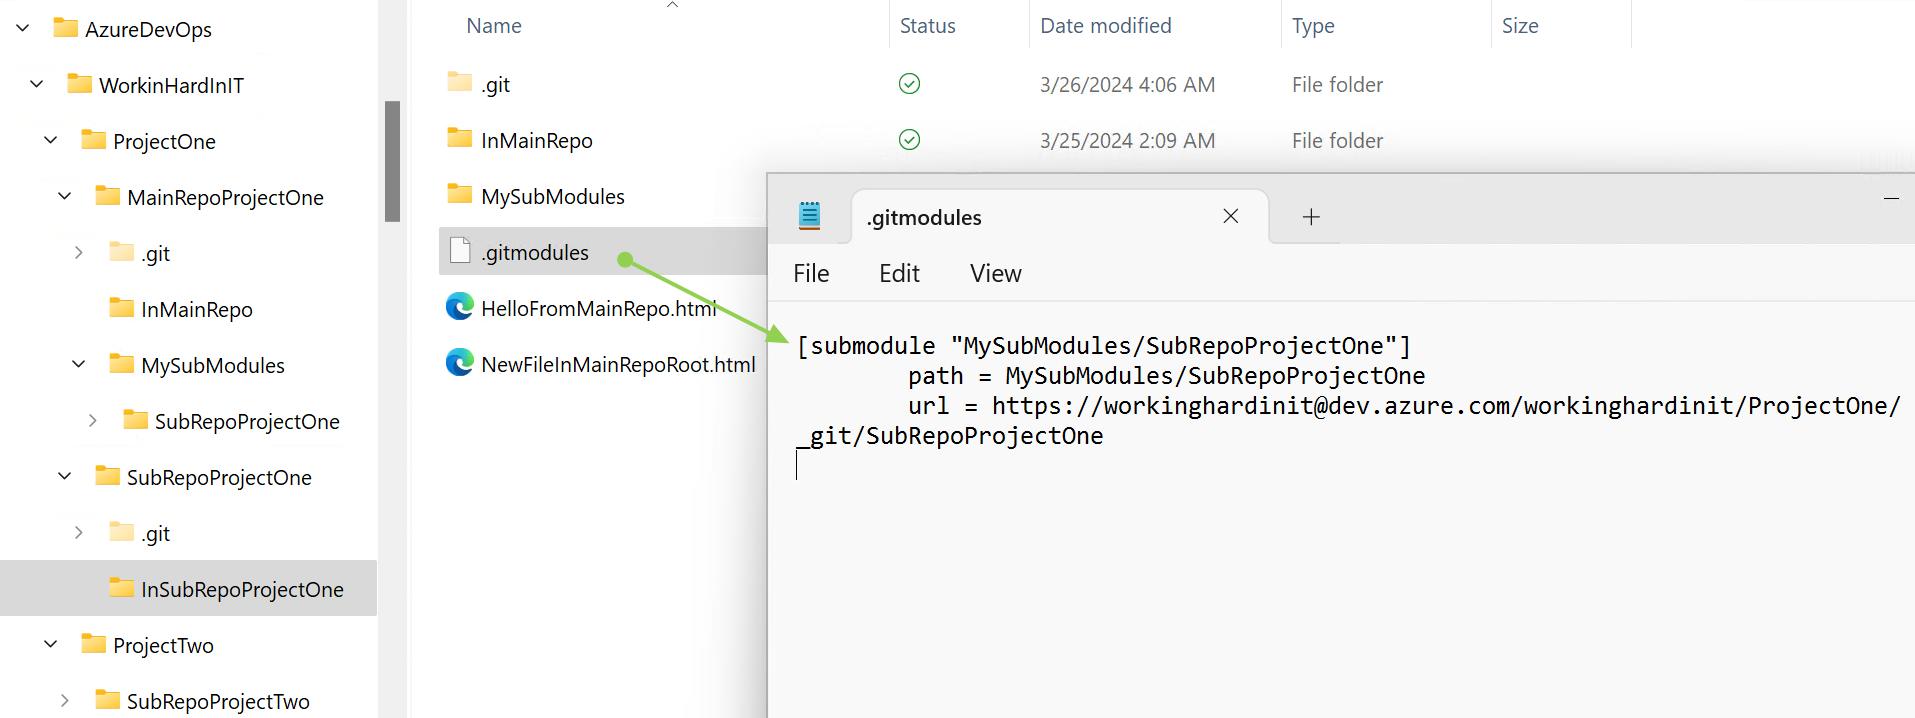 Secondly, navigate to the root folder and look at the contents of .gitmodules.